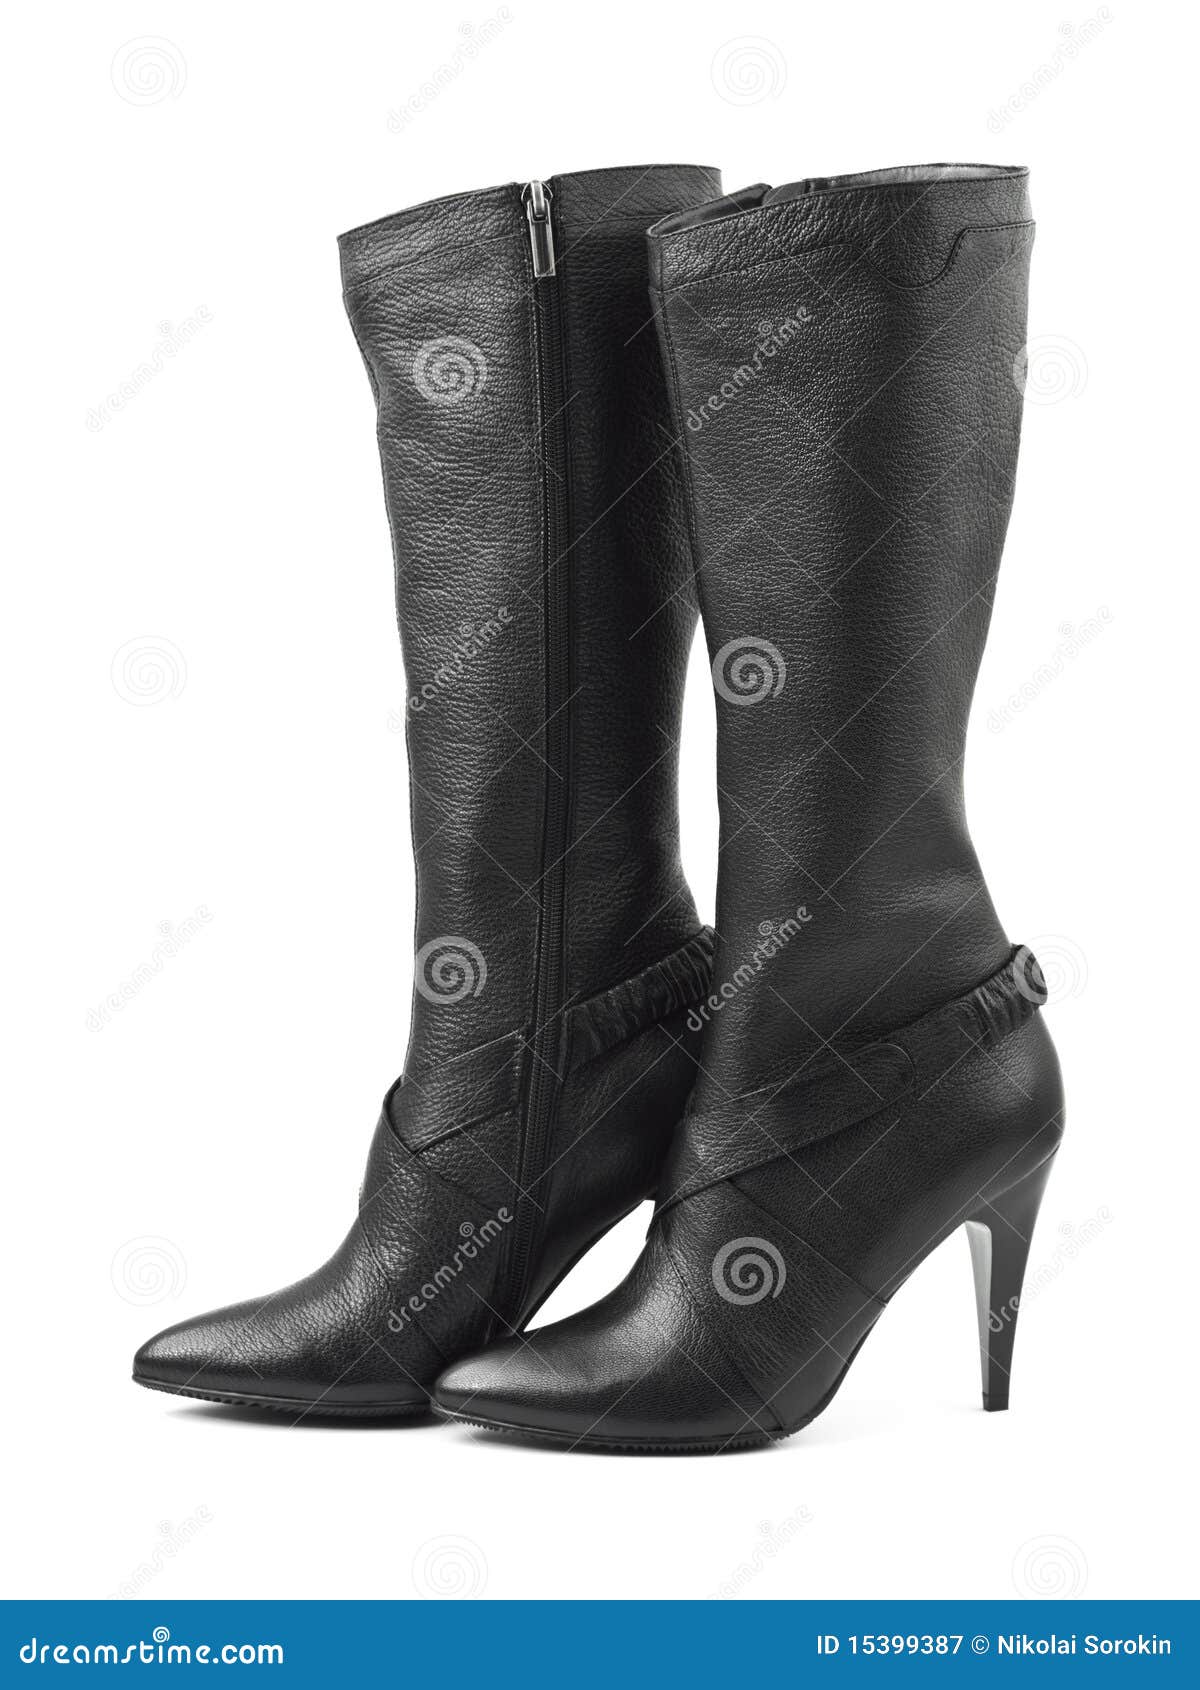 Black woman boots stock image. Image of shoe, pair, leather - 15399387